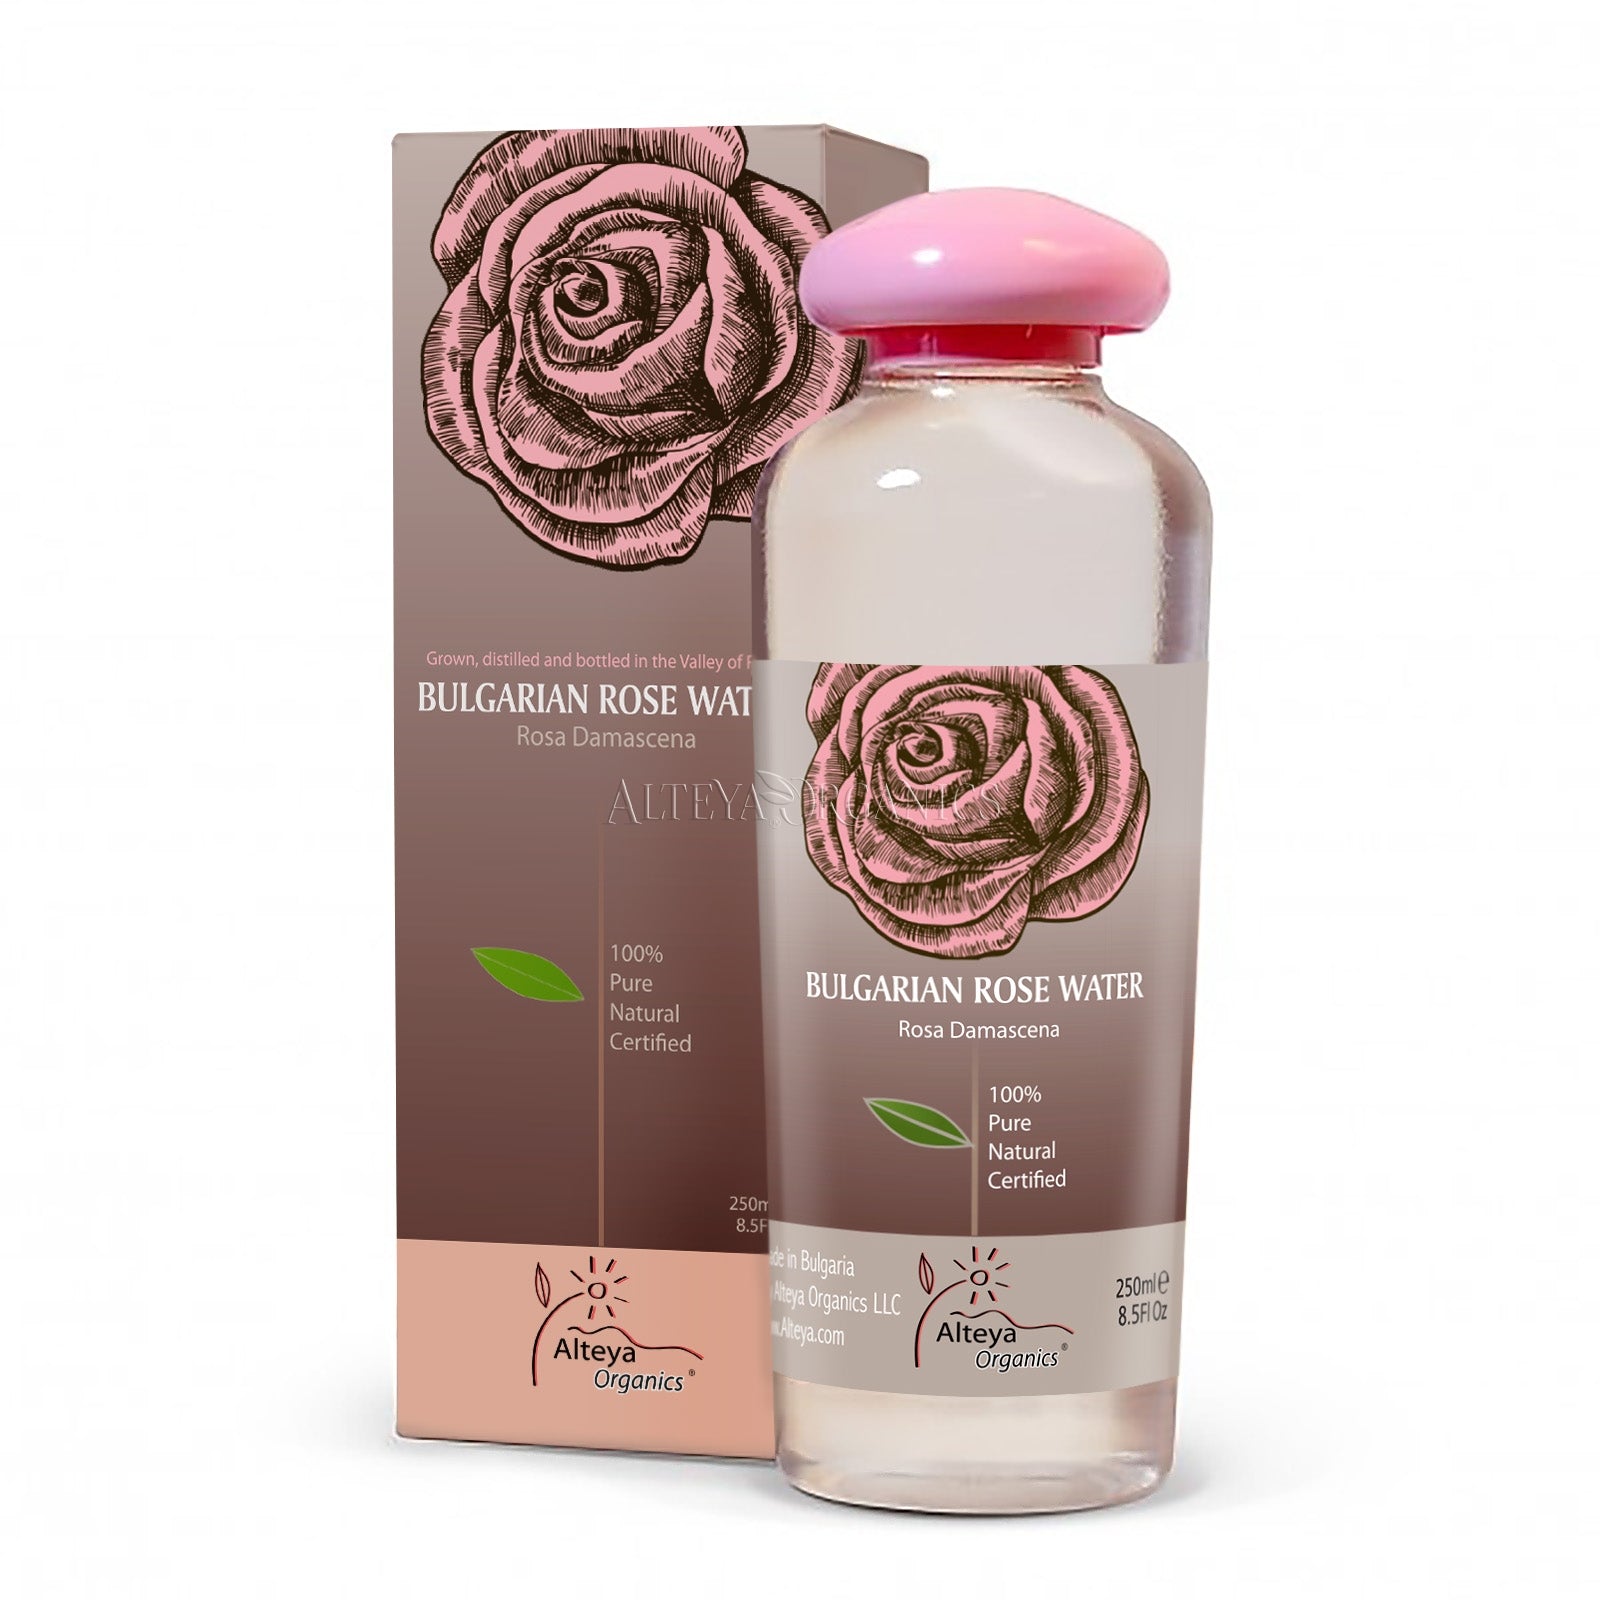 A box containing a bottle of Natural Bulgarian Rose Water, a 100% natural product.